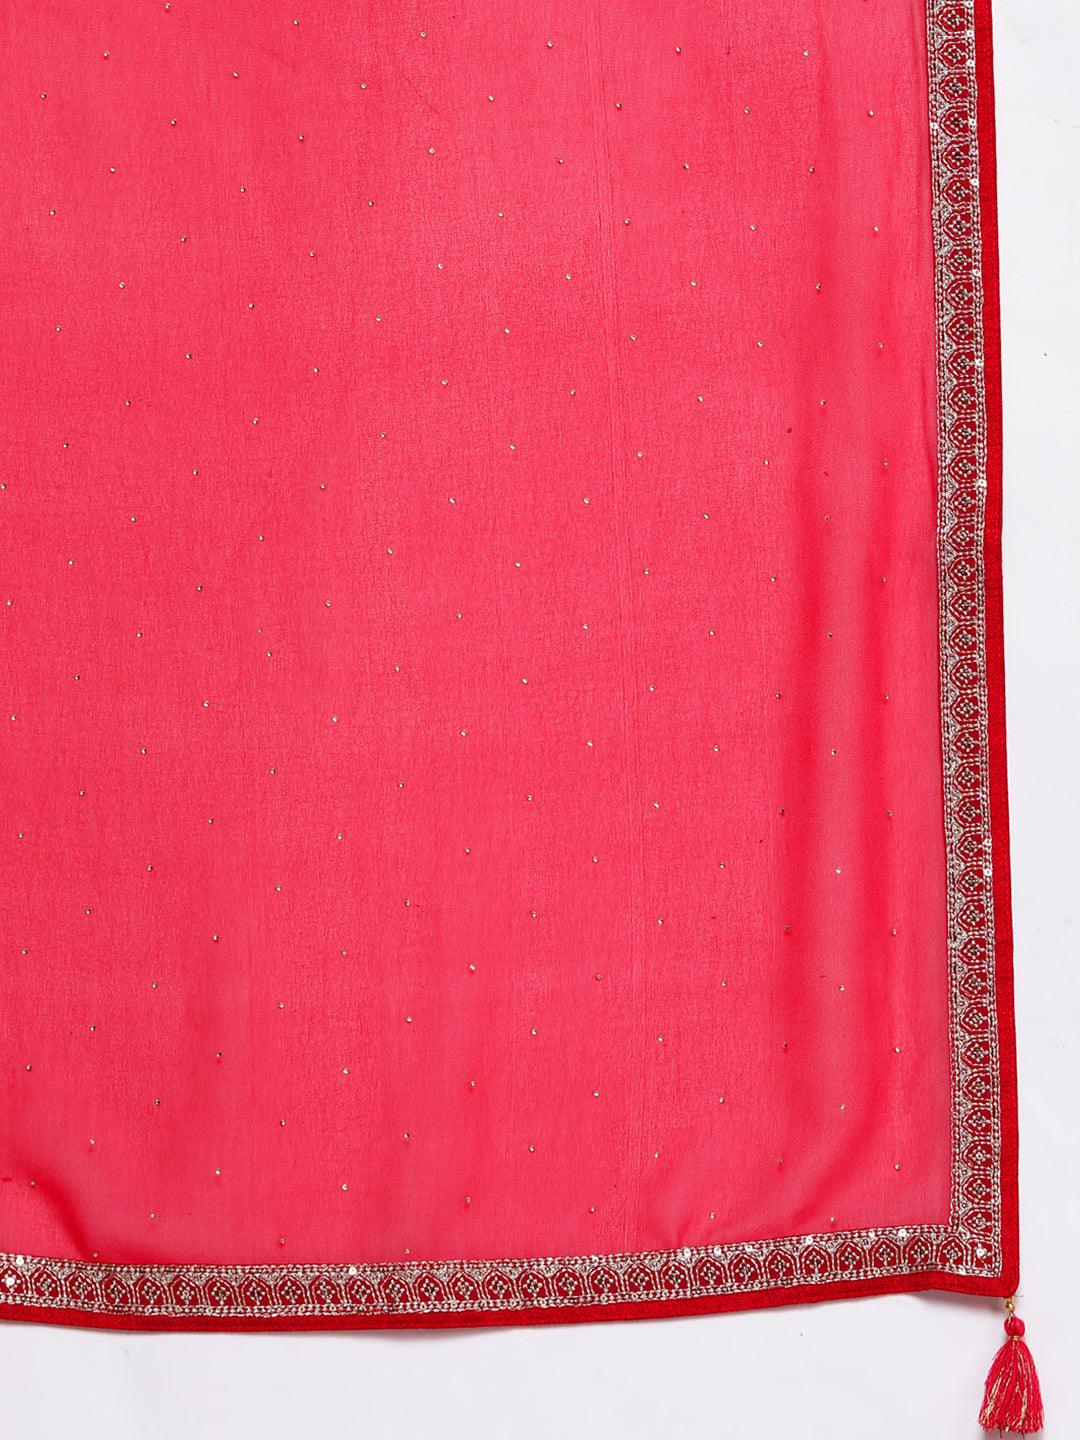 Hot Pink Embroidered Georgette A-Line Kurta With Palazzos & Dupatta